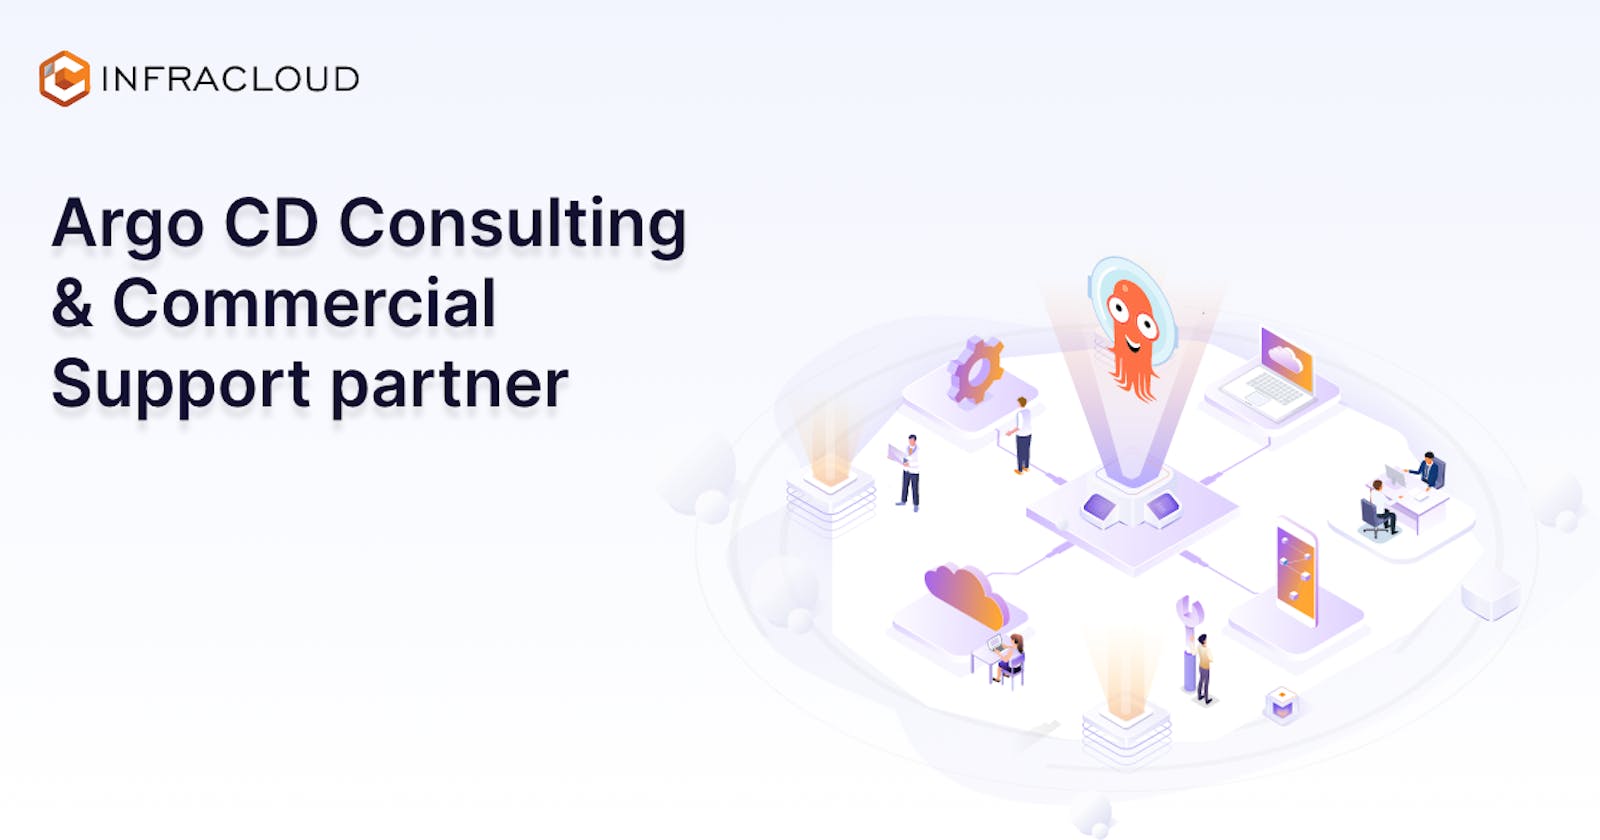 Argo CD Consulting Services &
Implementation Partner